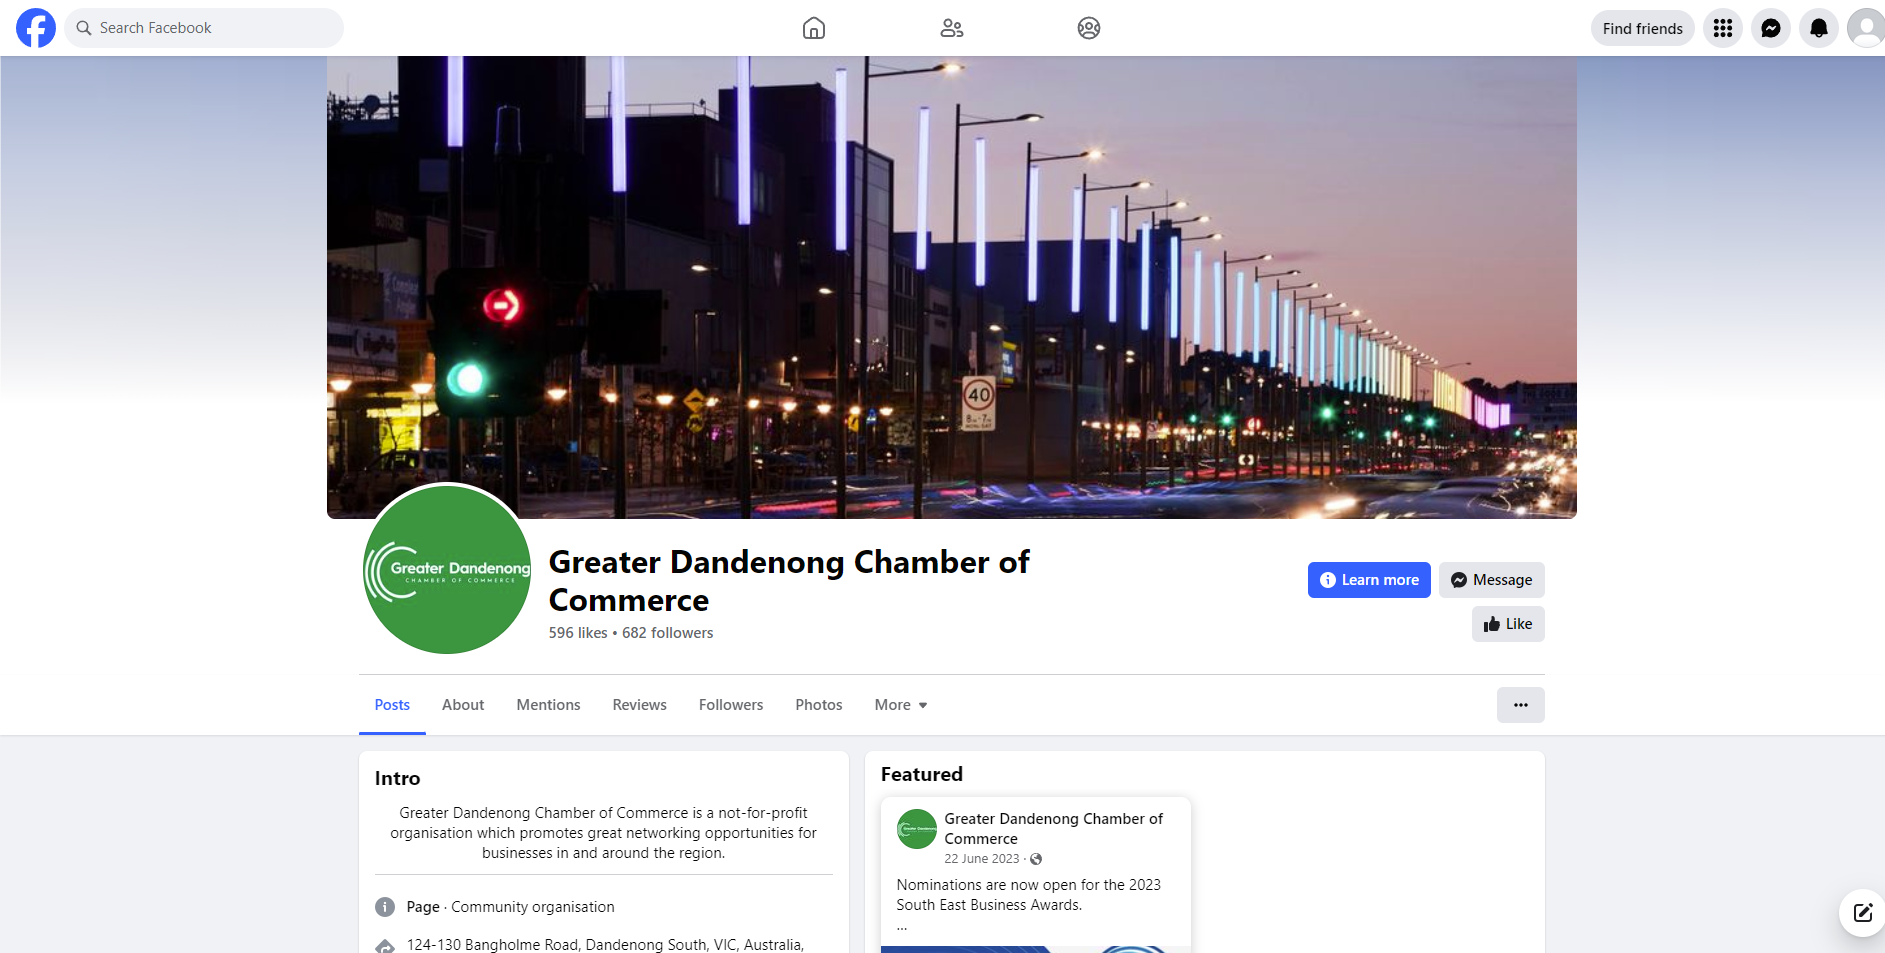 Greater Dandenong Chamber of Commerce